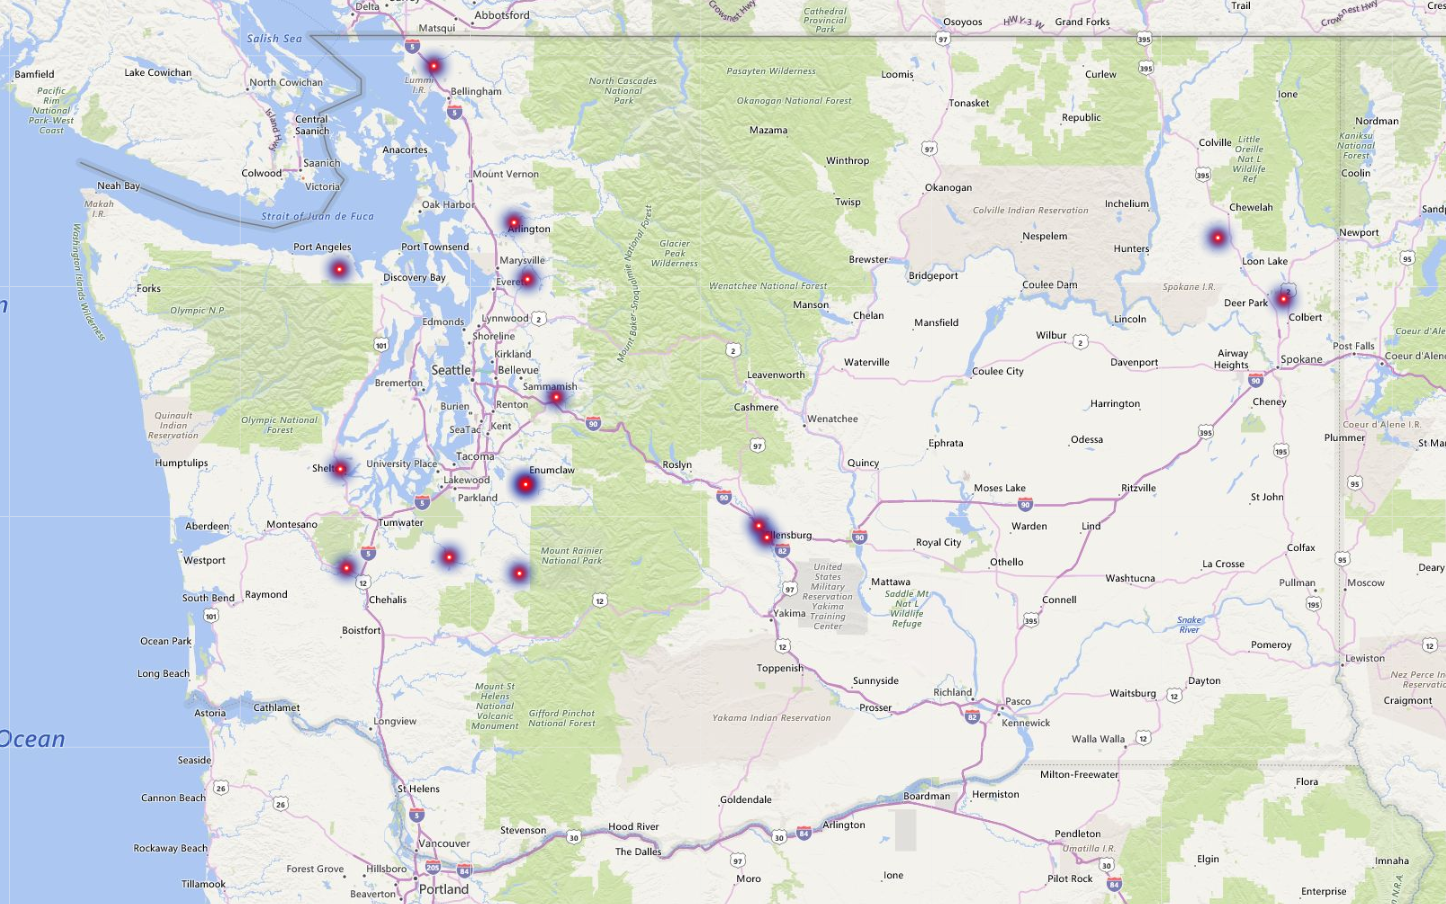 Map of Washington state with projects that will improve streamflows while providing water for rural homes.